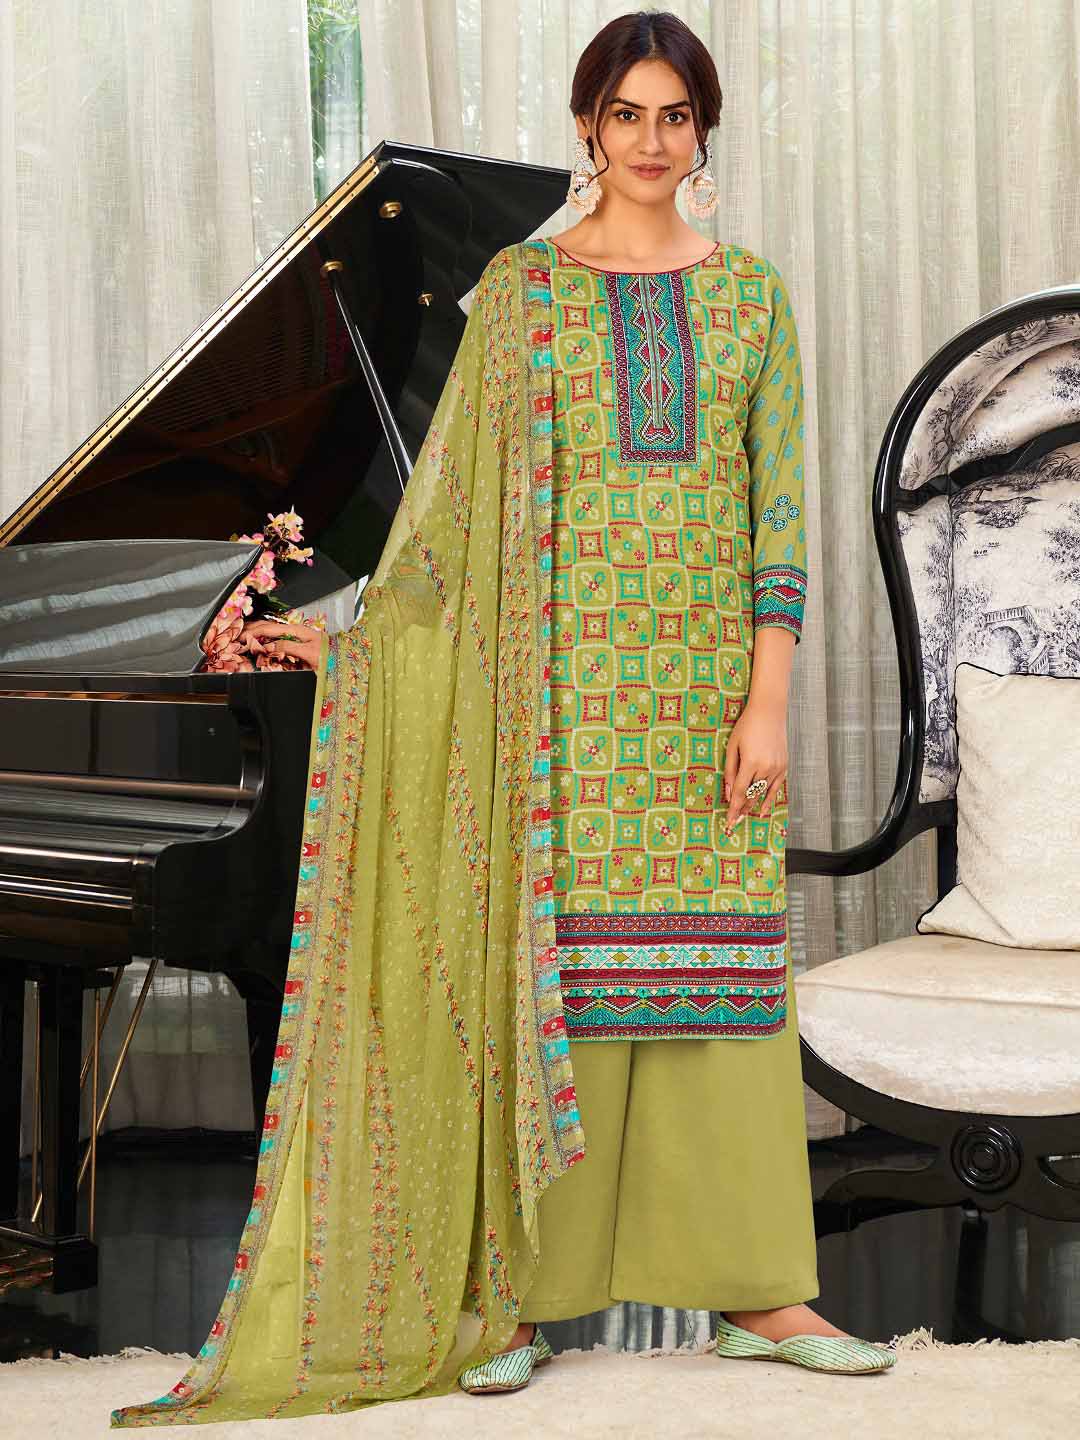 Unstitched Green Cotton Printed Suit Materials for Women with Dupatta - Stilento